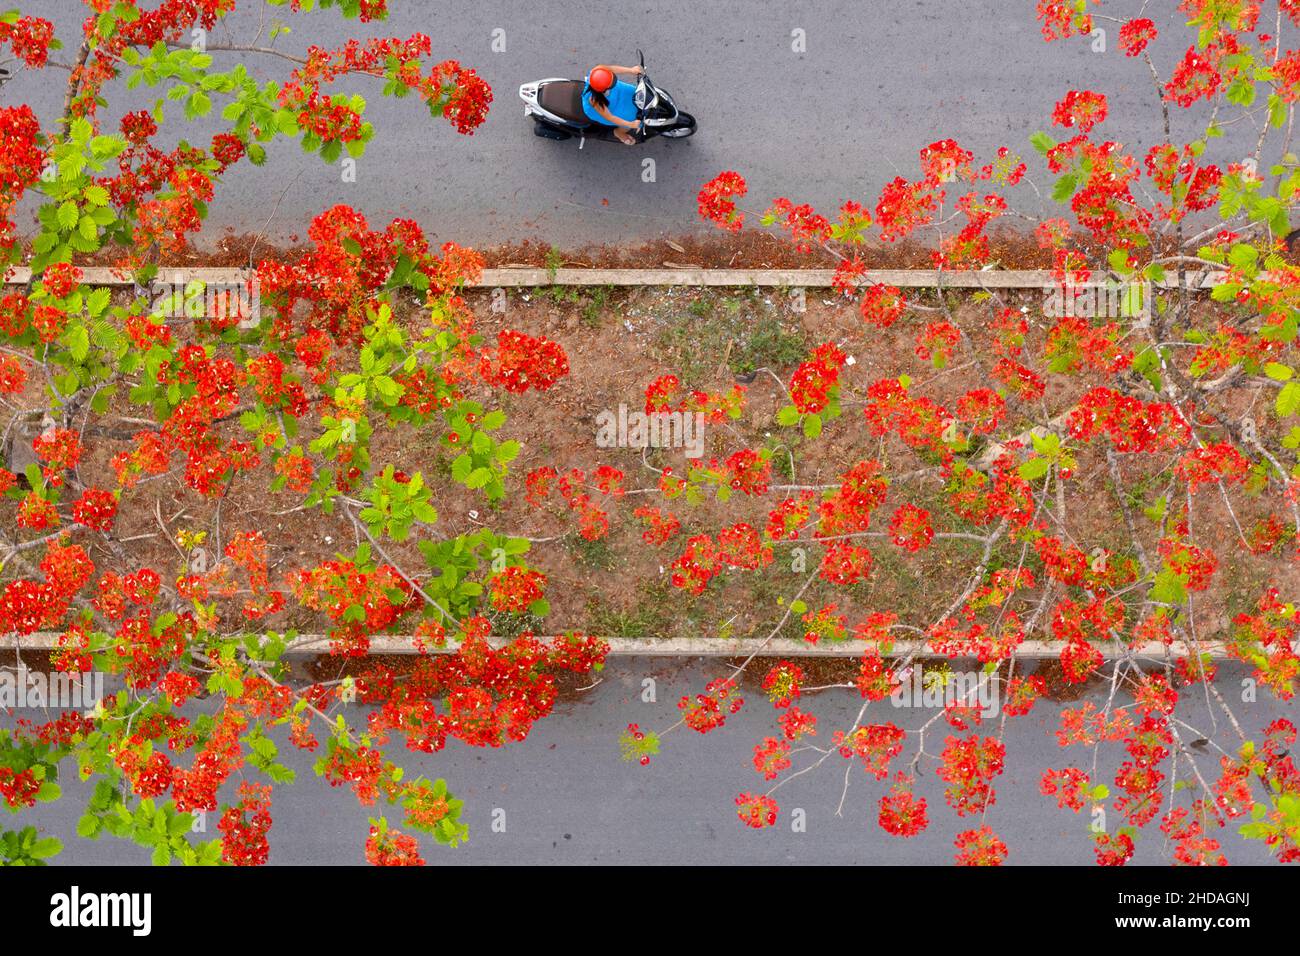 Phoenix flowers are blooming red on the streets of Vinh Long, Vietnam Stock Photo